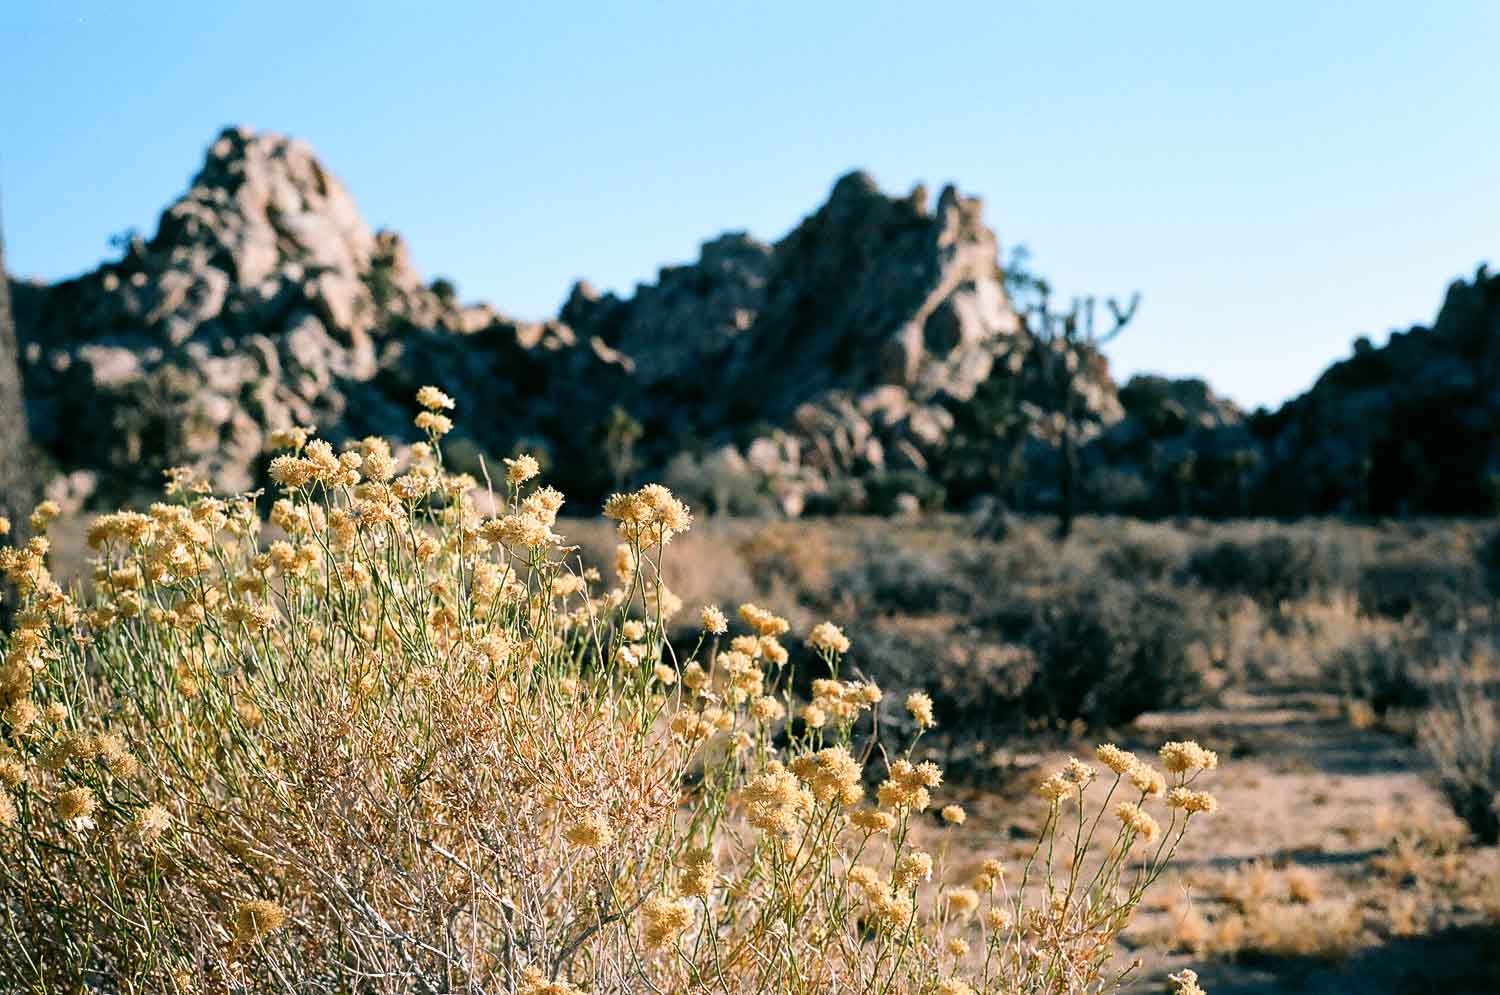 Rocky desert landscape with wildflowers in the foreground.